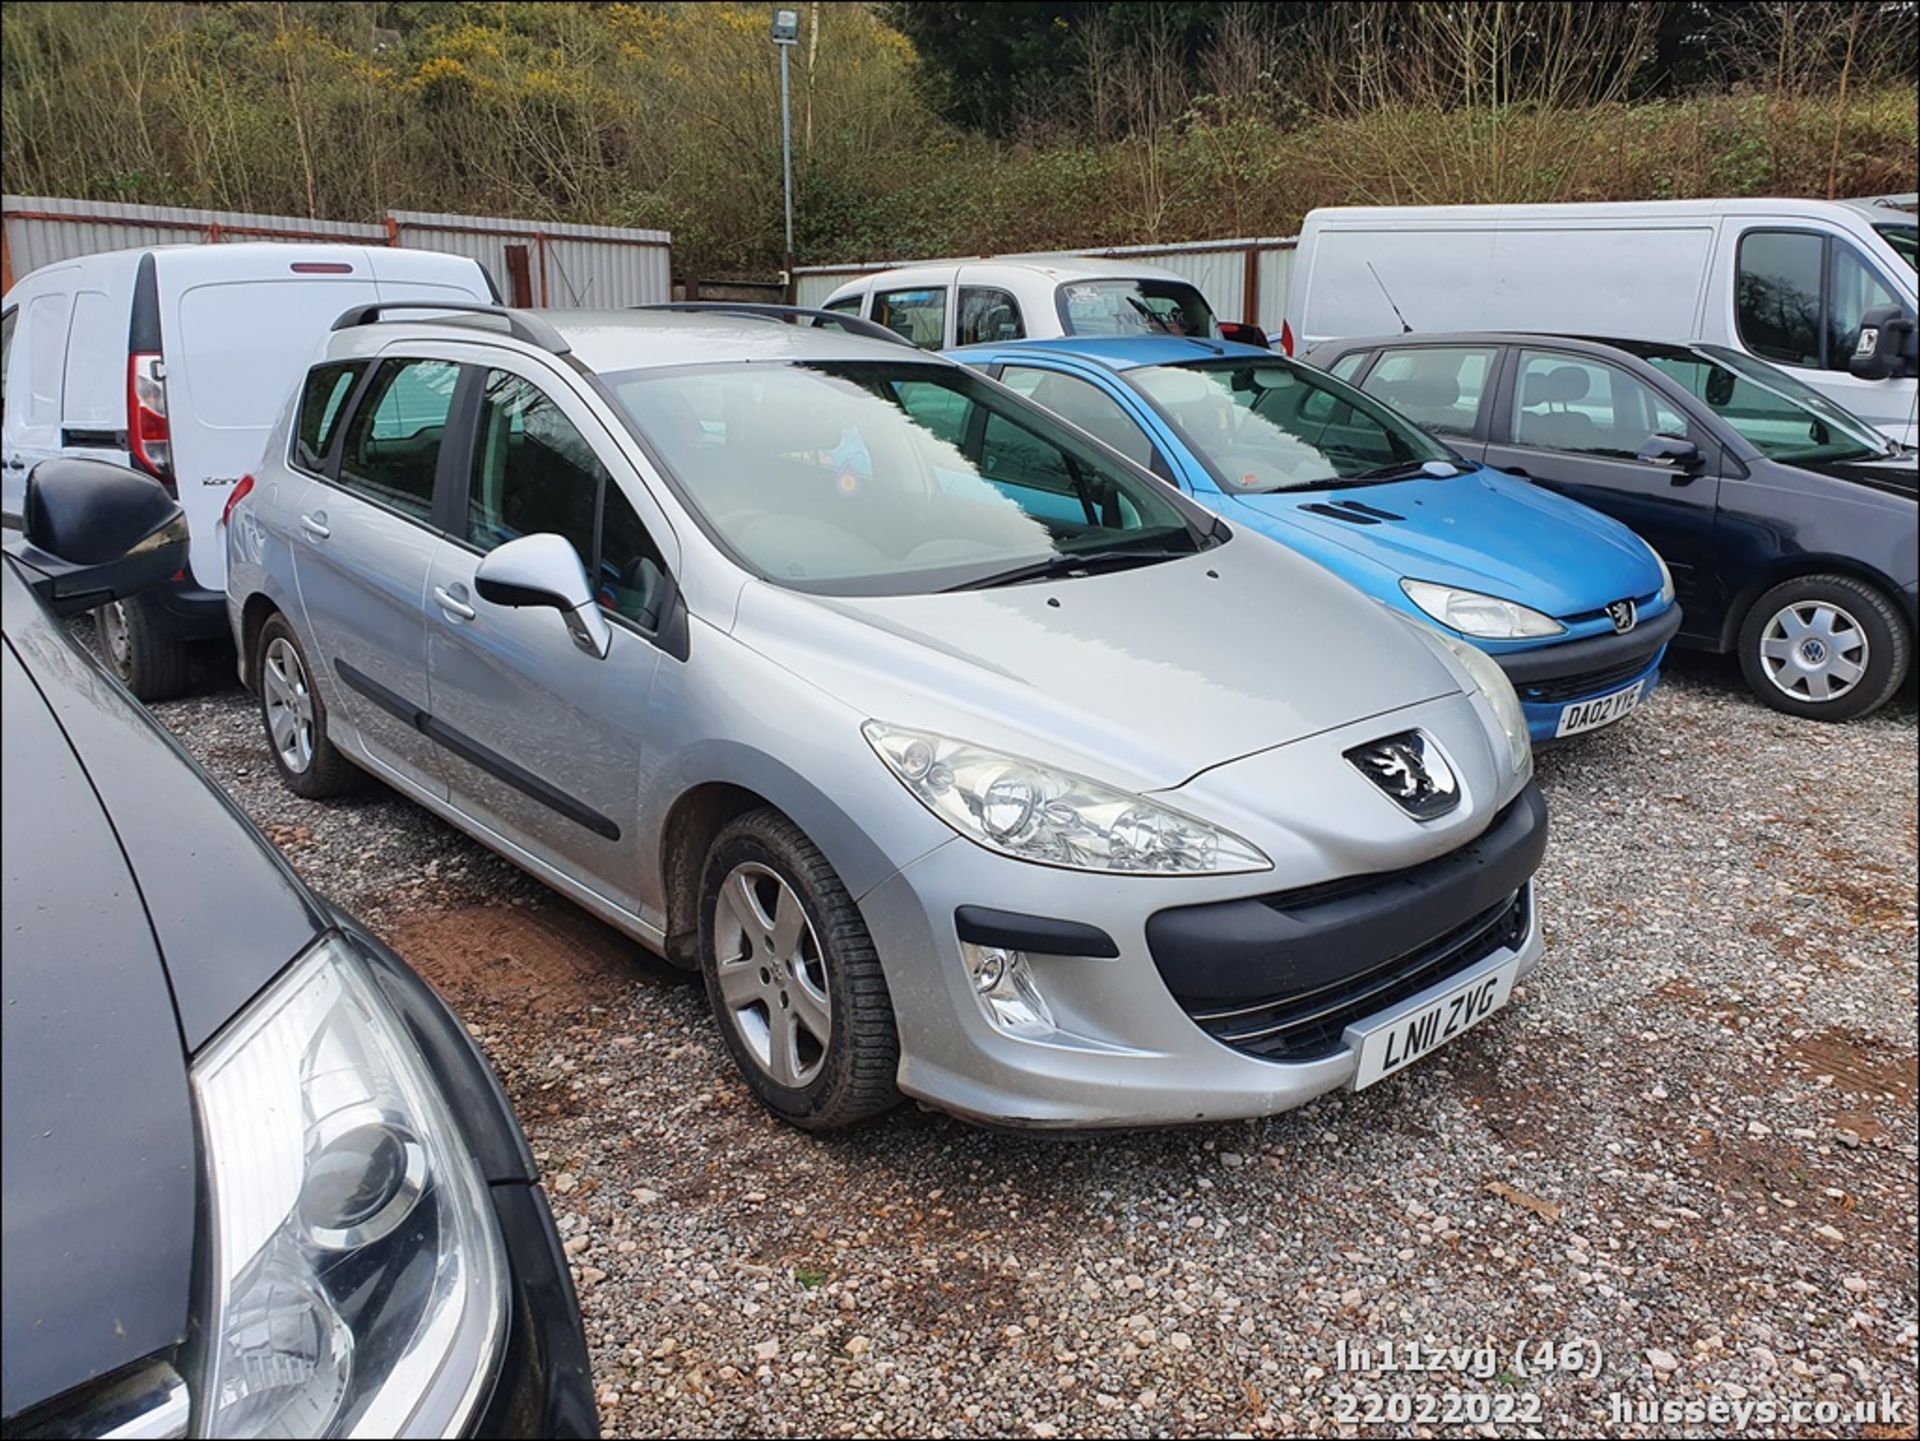 11/11 PEUGEOT 308 S SW HDI 92 - 1560cc 5dr Estate (Silver, 115k) - Image 46 of 46